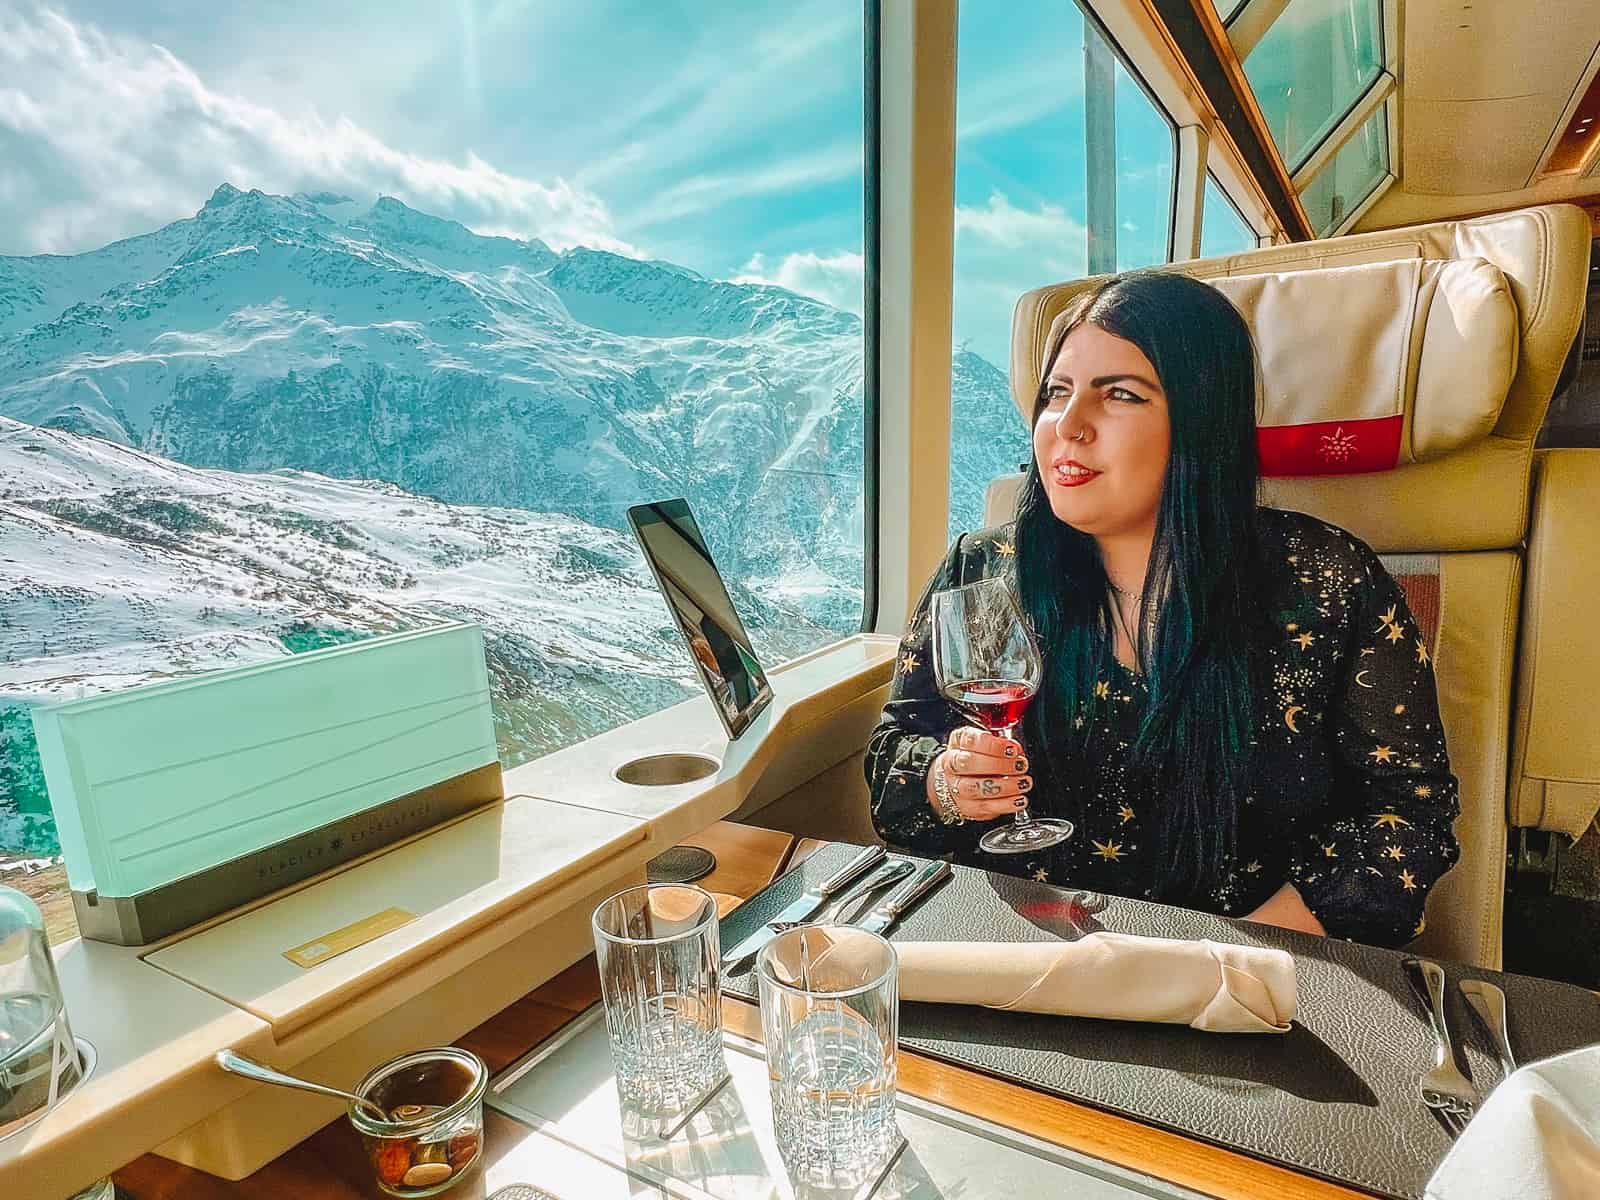 Glacier Express Excellence Class Review worth it?